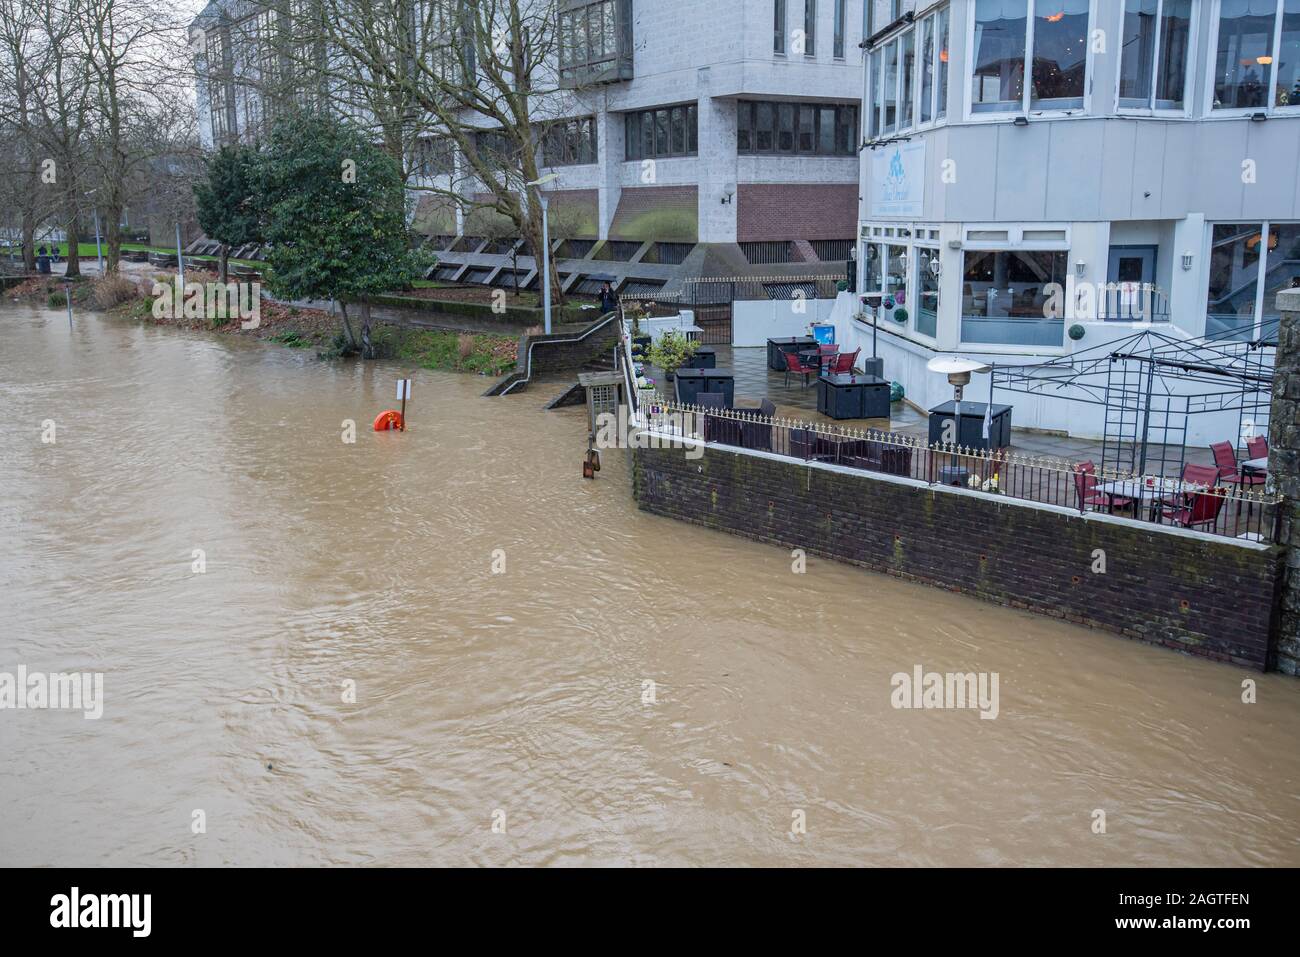 Maidstone, Kent, England - Dec 21 2019: Maidstone city centre during the flood of Medway river Stock Photo